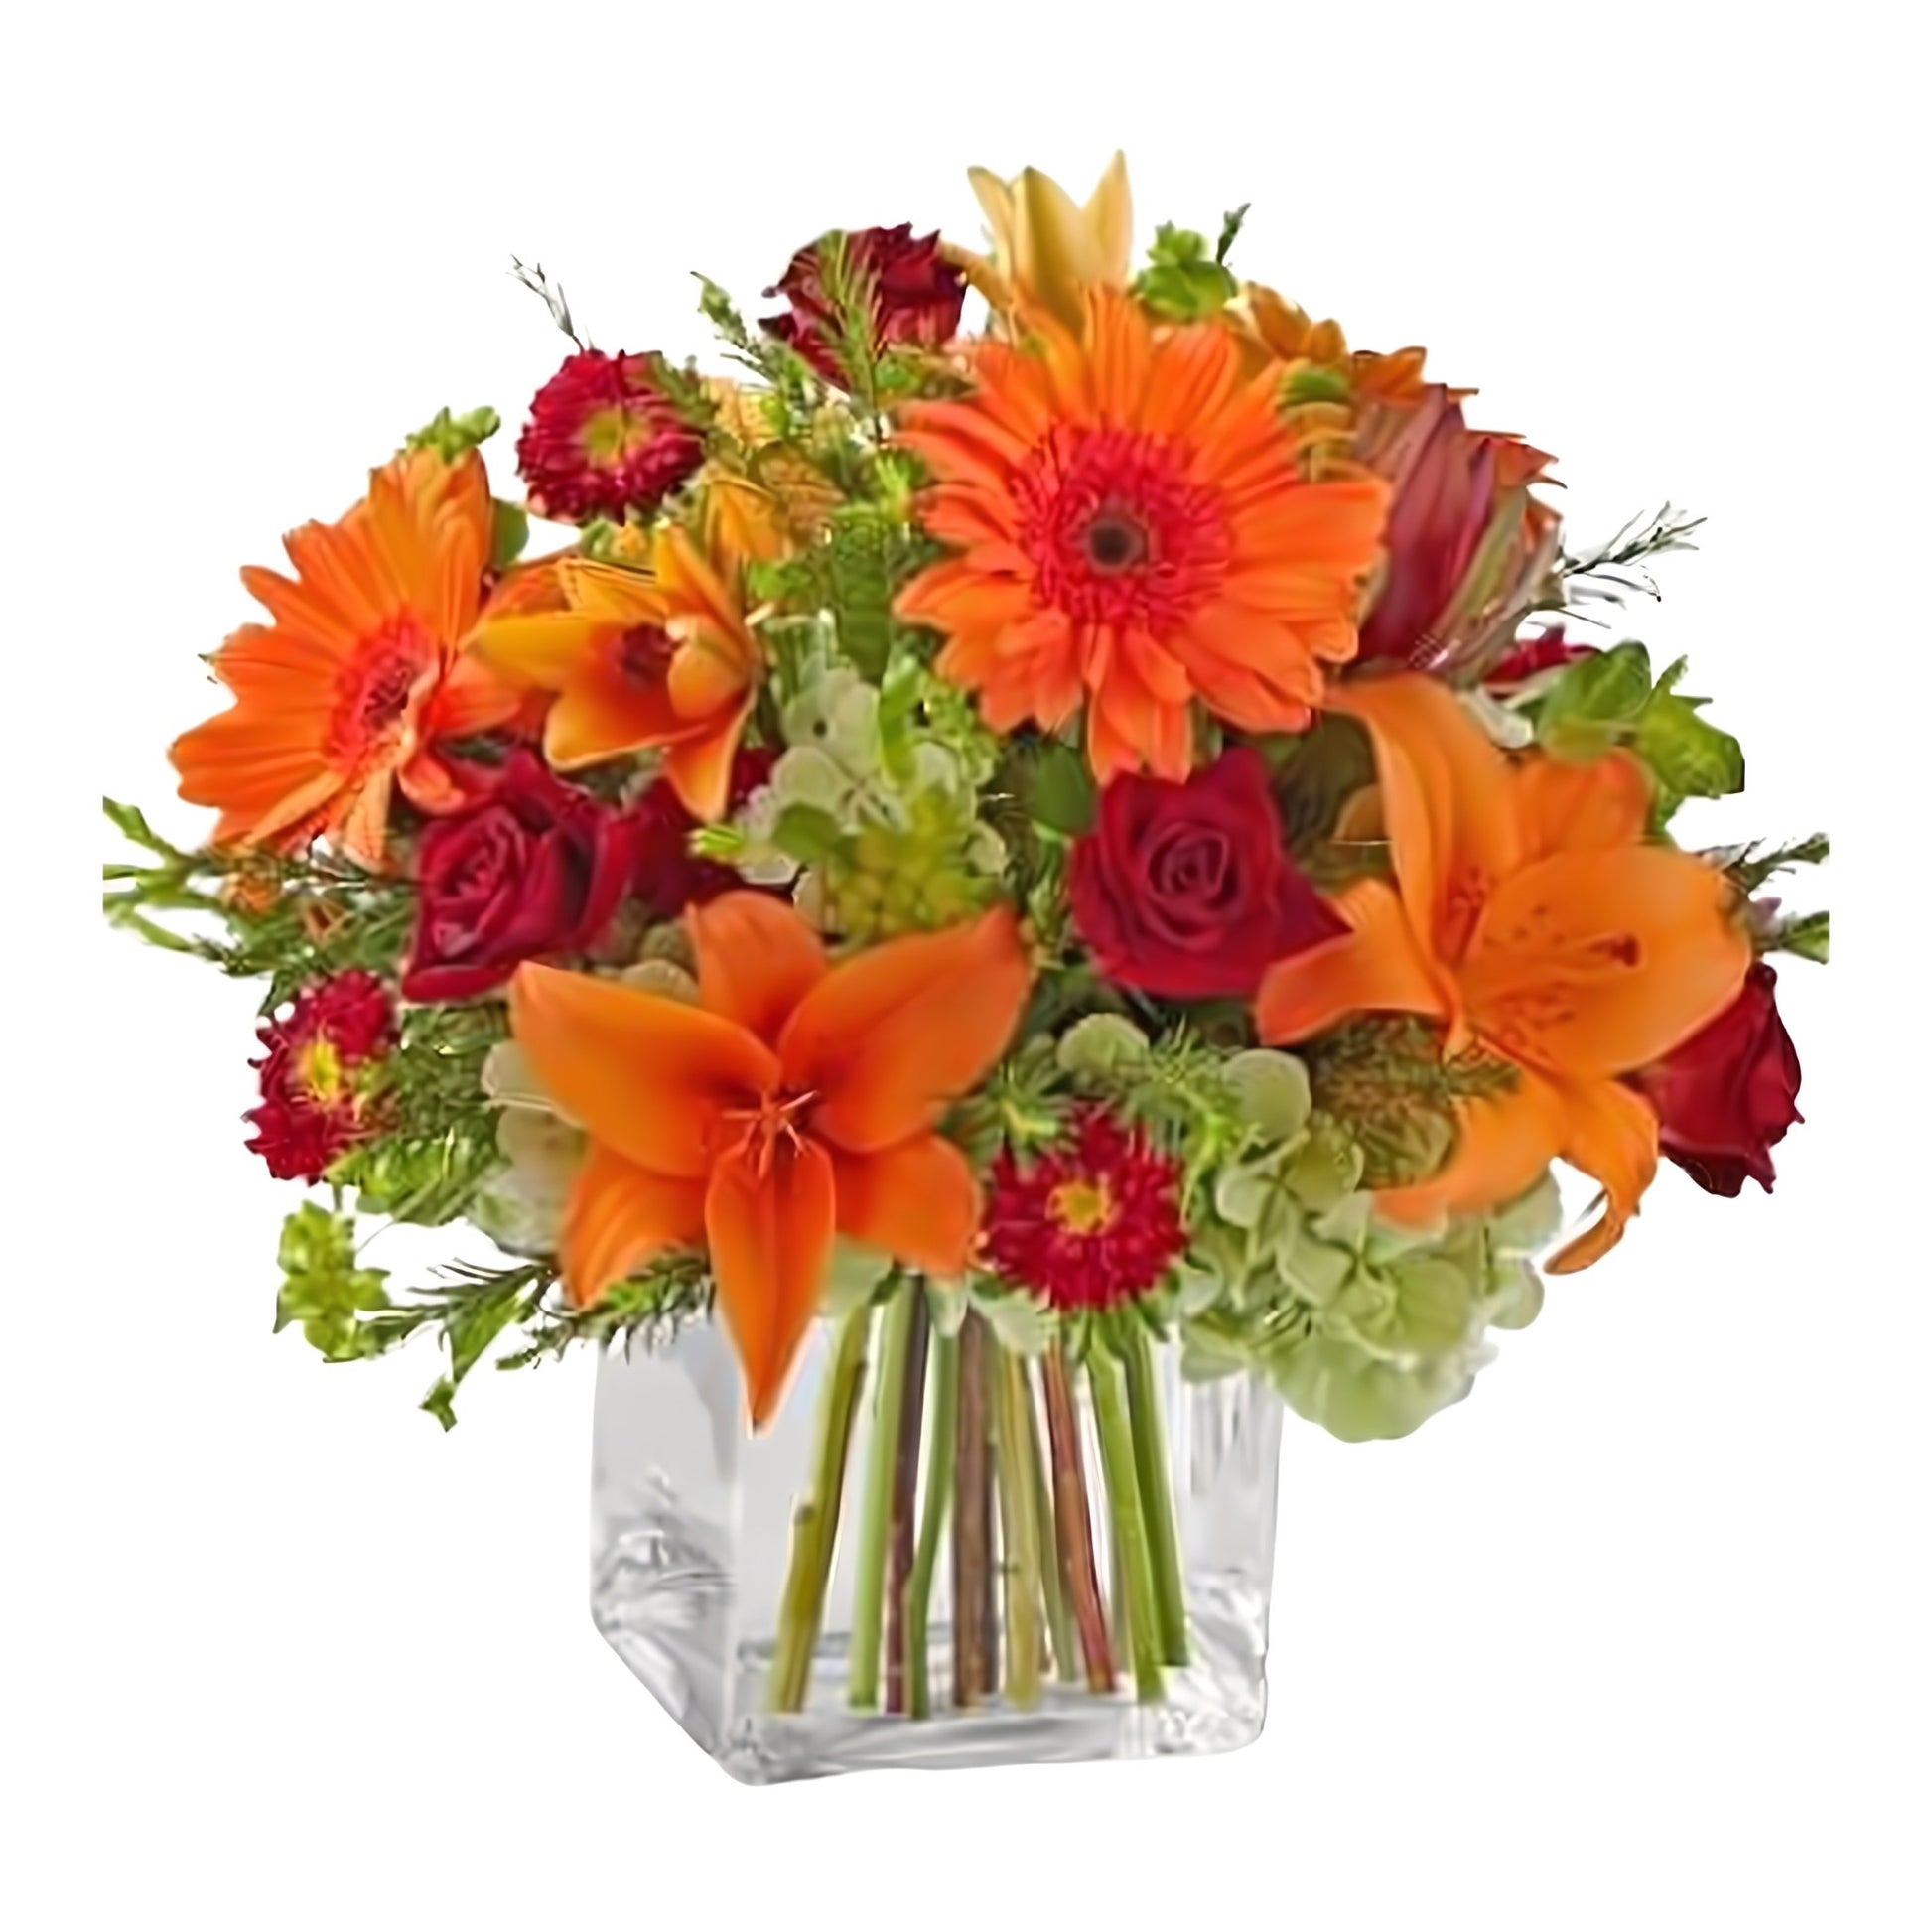 Fabulous Fall Bouquet - Fall Collection - Queens Flower Delivery